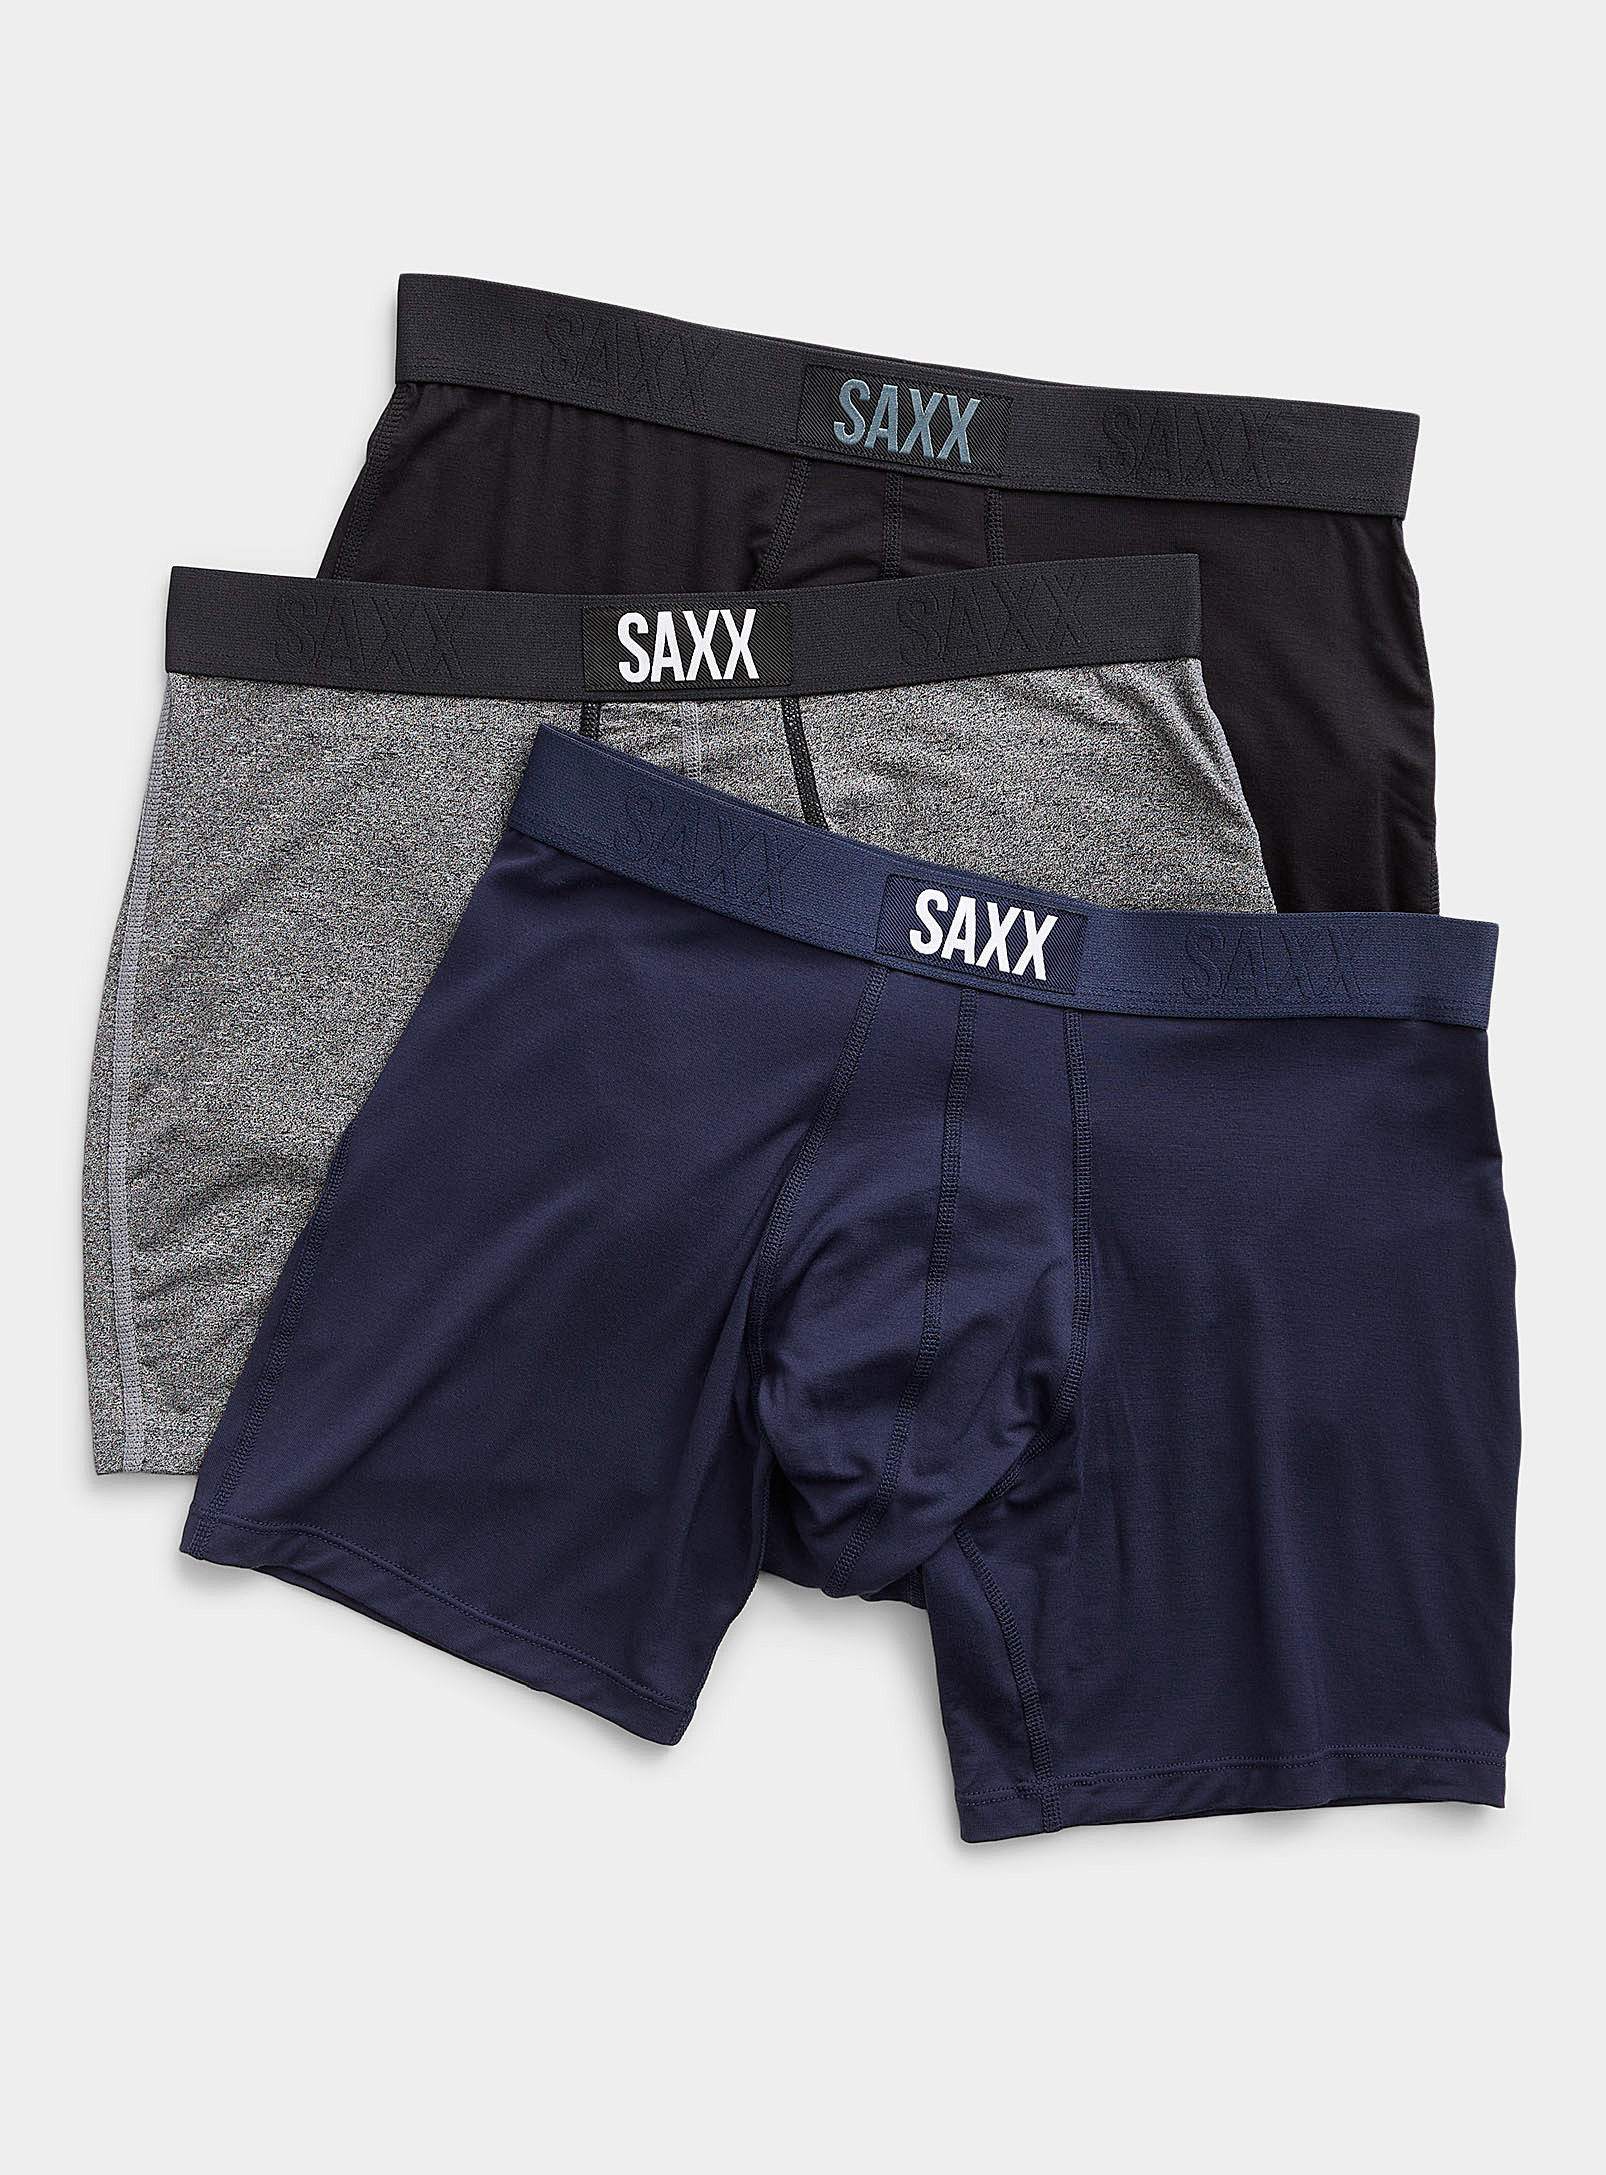 Saxx 3-pack In Patterned Black